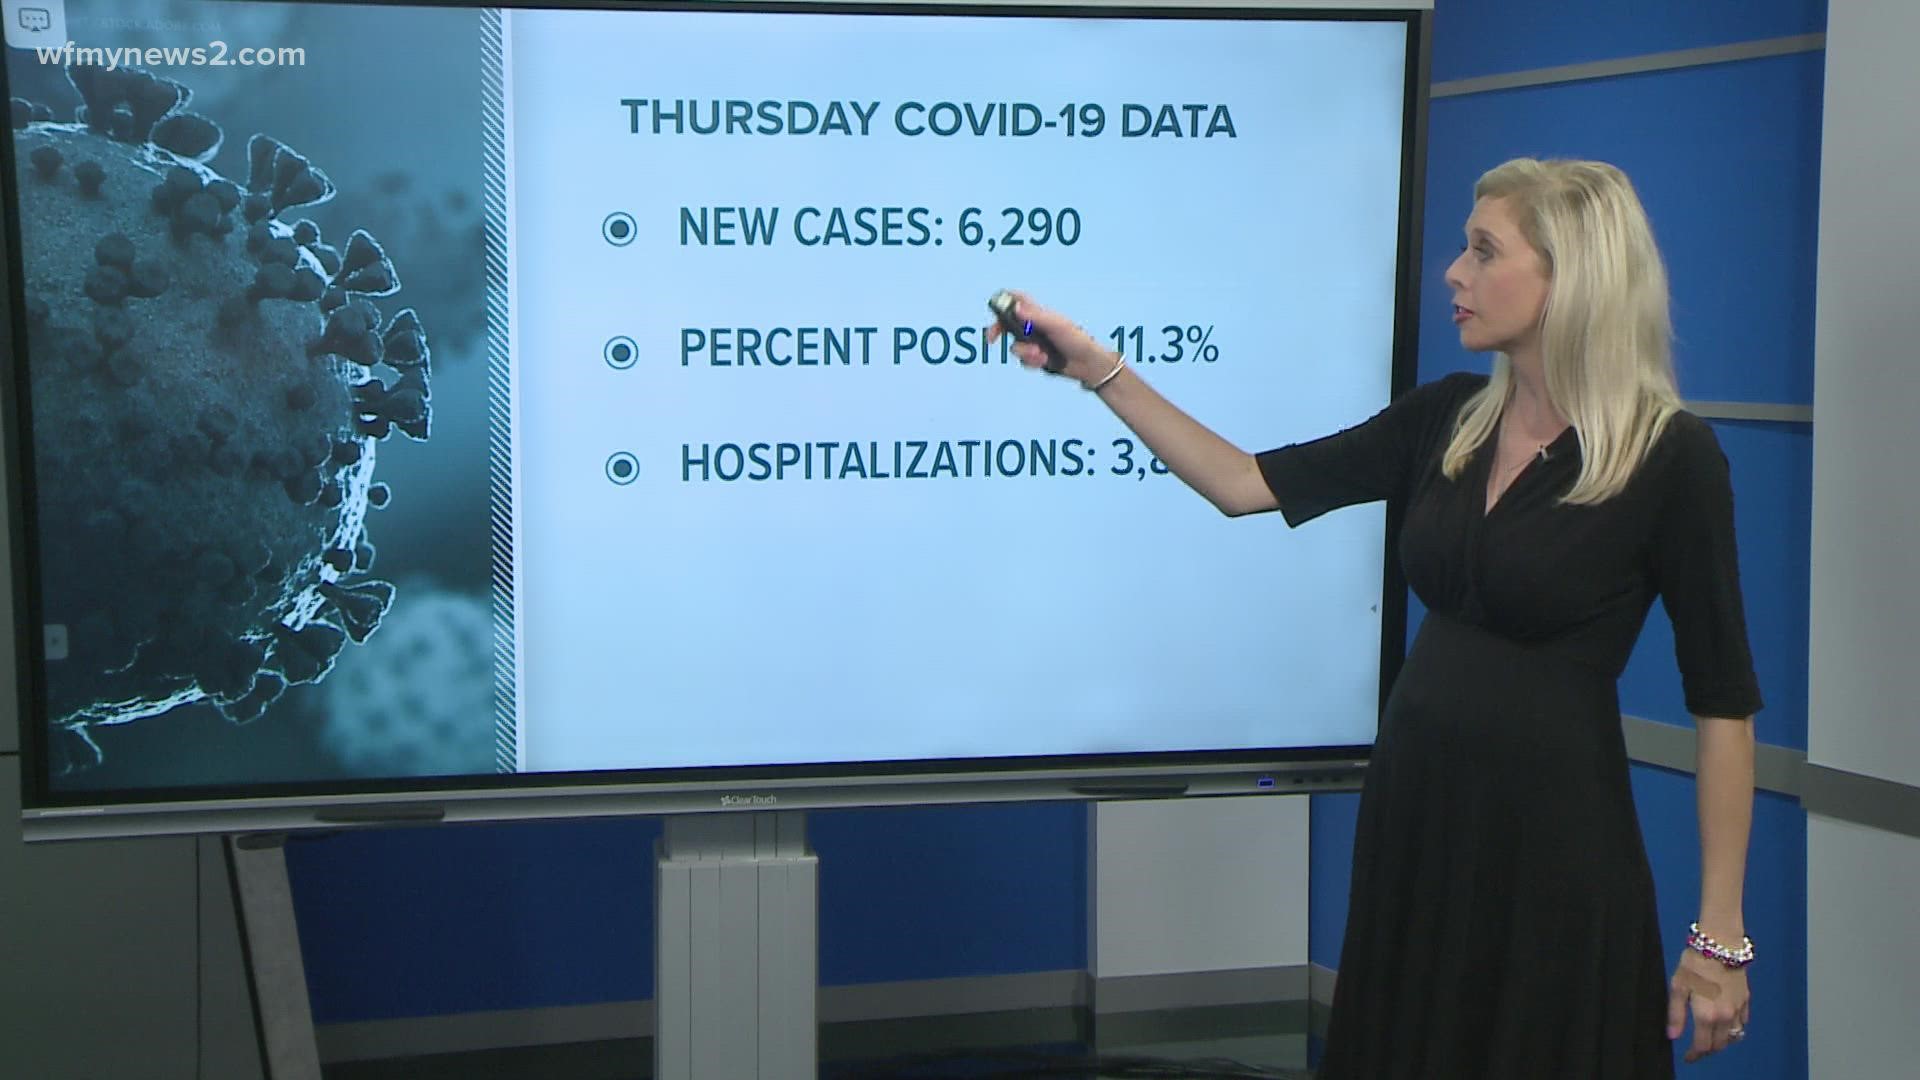 Cone Health reports 96% of its current patients with COVID-19 are unvaccinated – more evidence the vaccines significantly reduce serious illness and death.